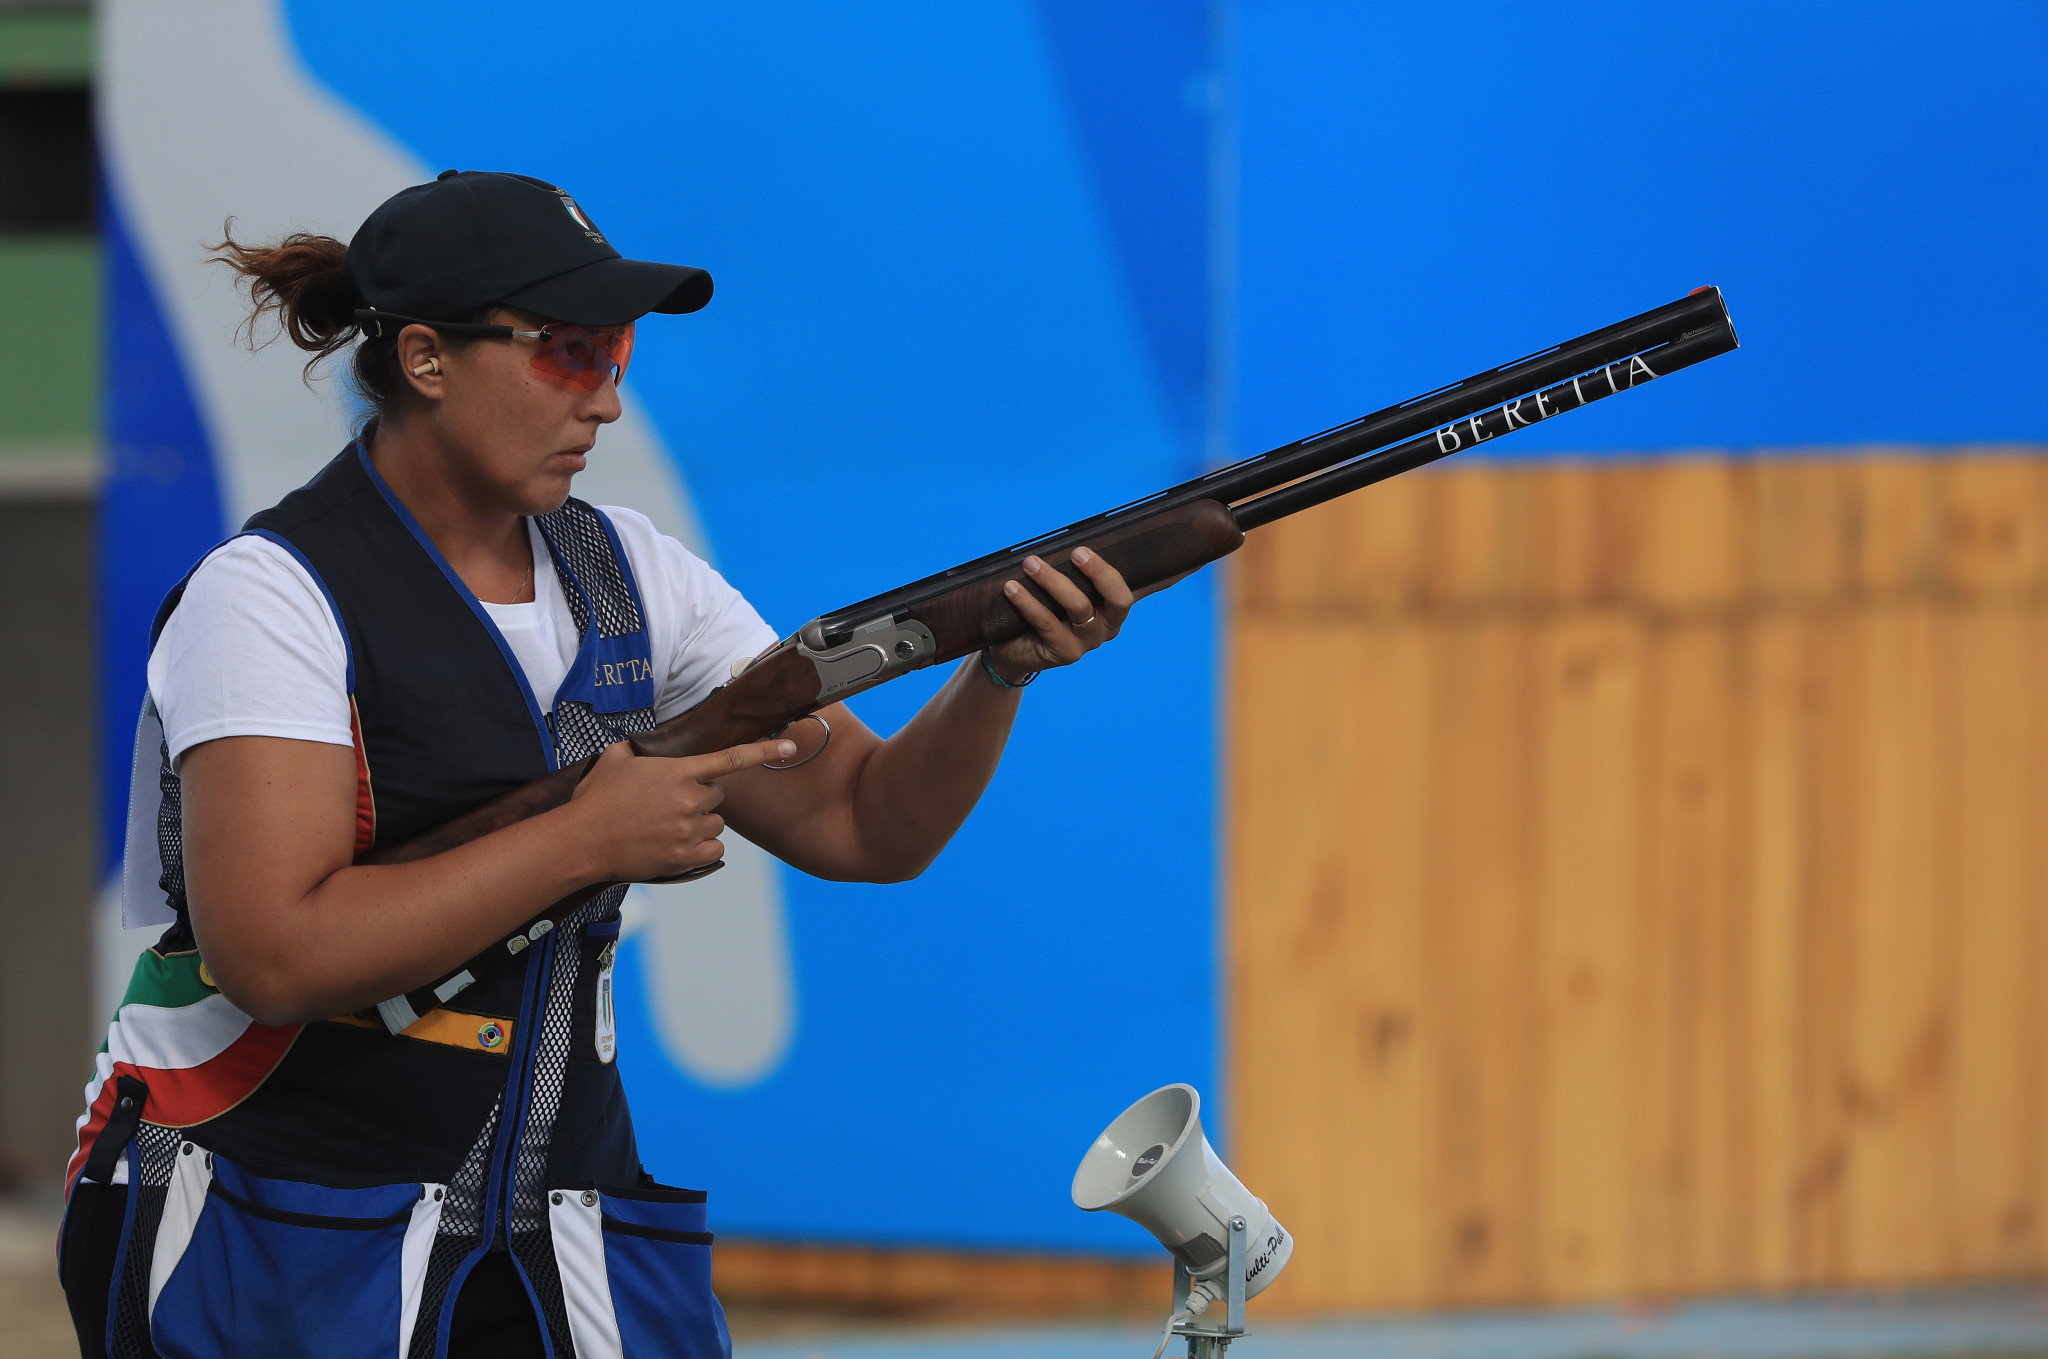 Olympic champion Bacosi claims women's skeet gold at ISSF World Shotgun Championship to leave Italy top of medals table